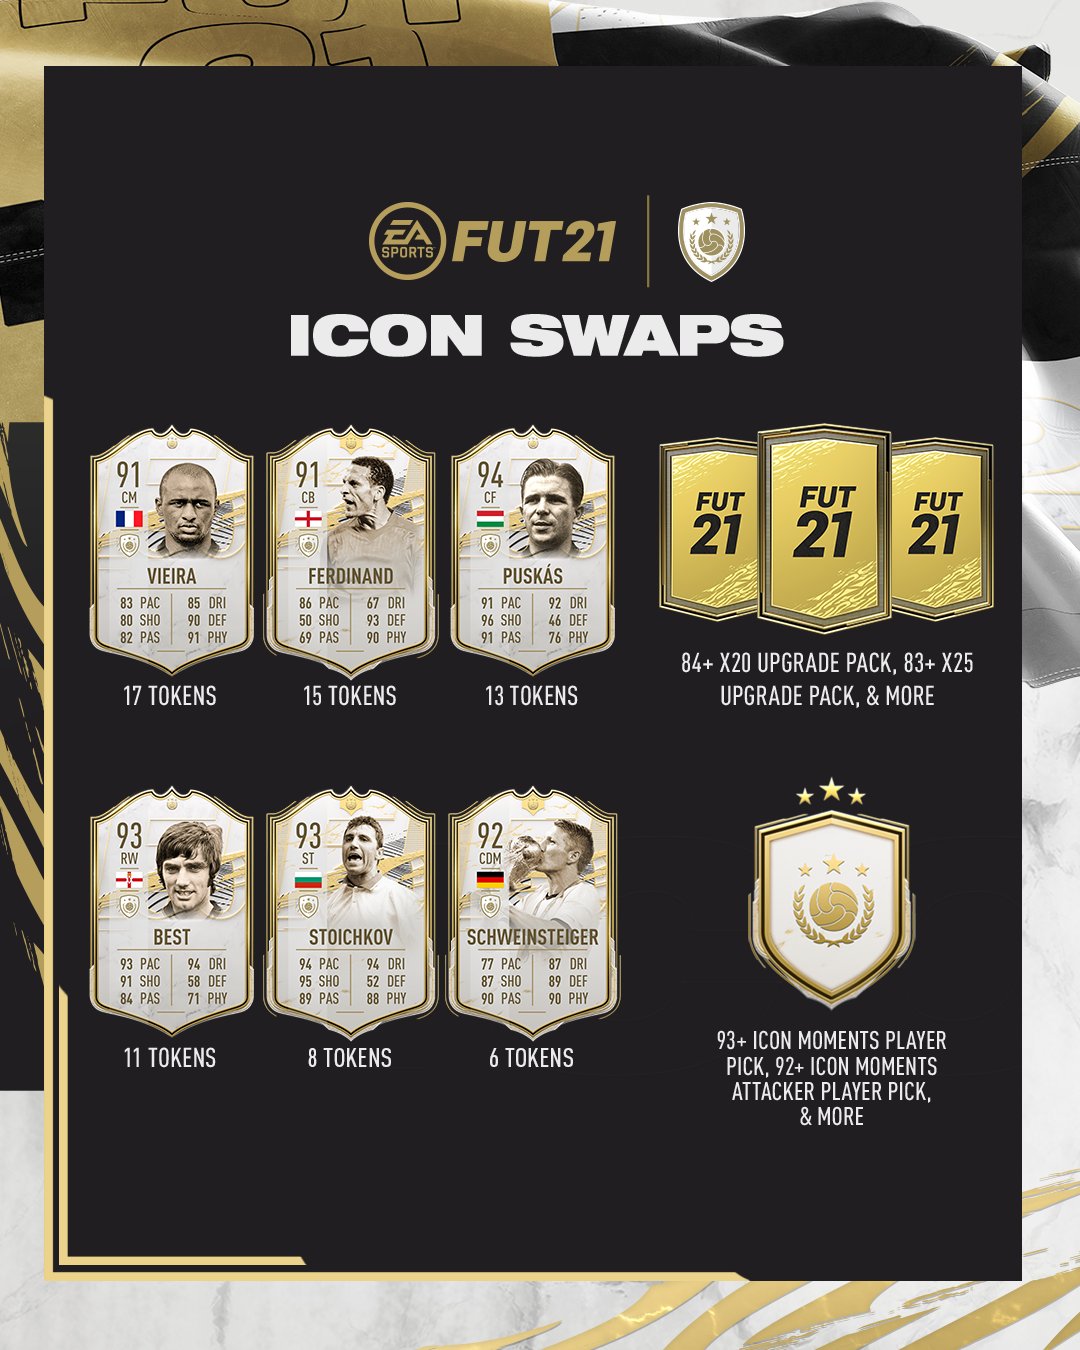 FUT Sheriff - Puskás🇭🇺 is coming as THUNDERSTRUCK ICON soon